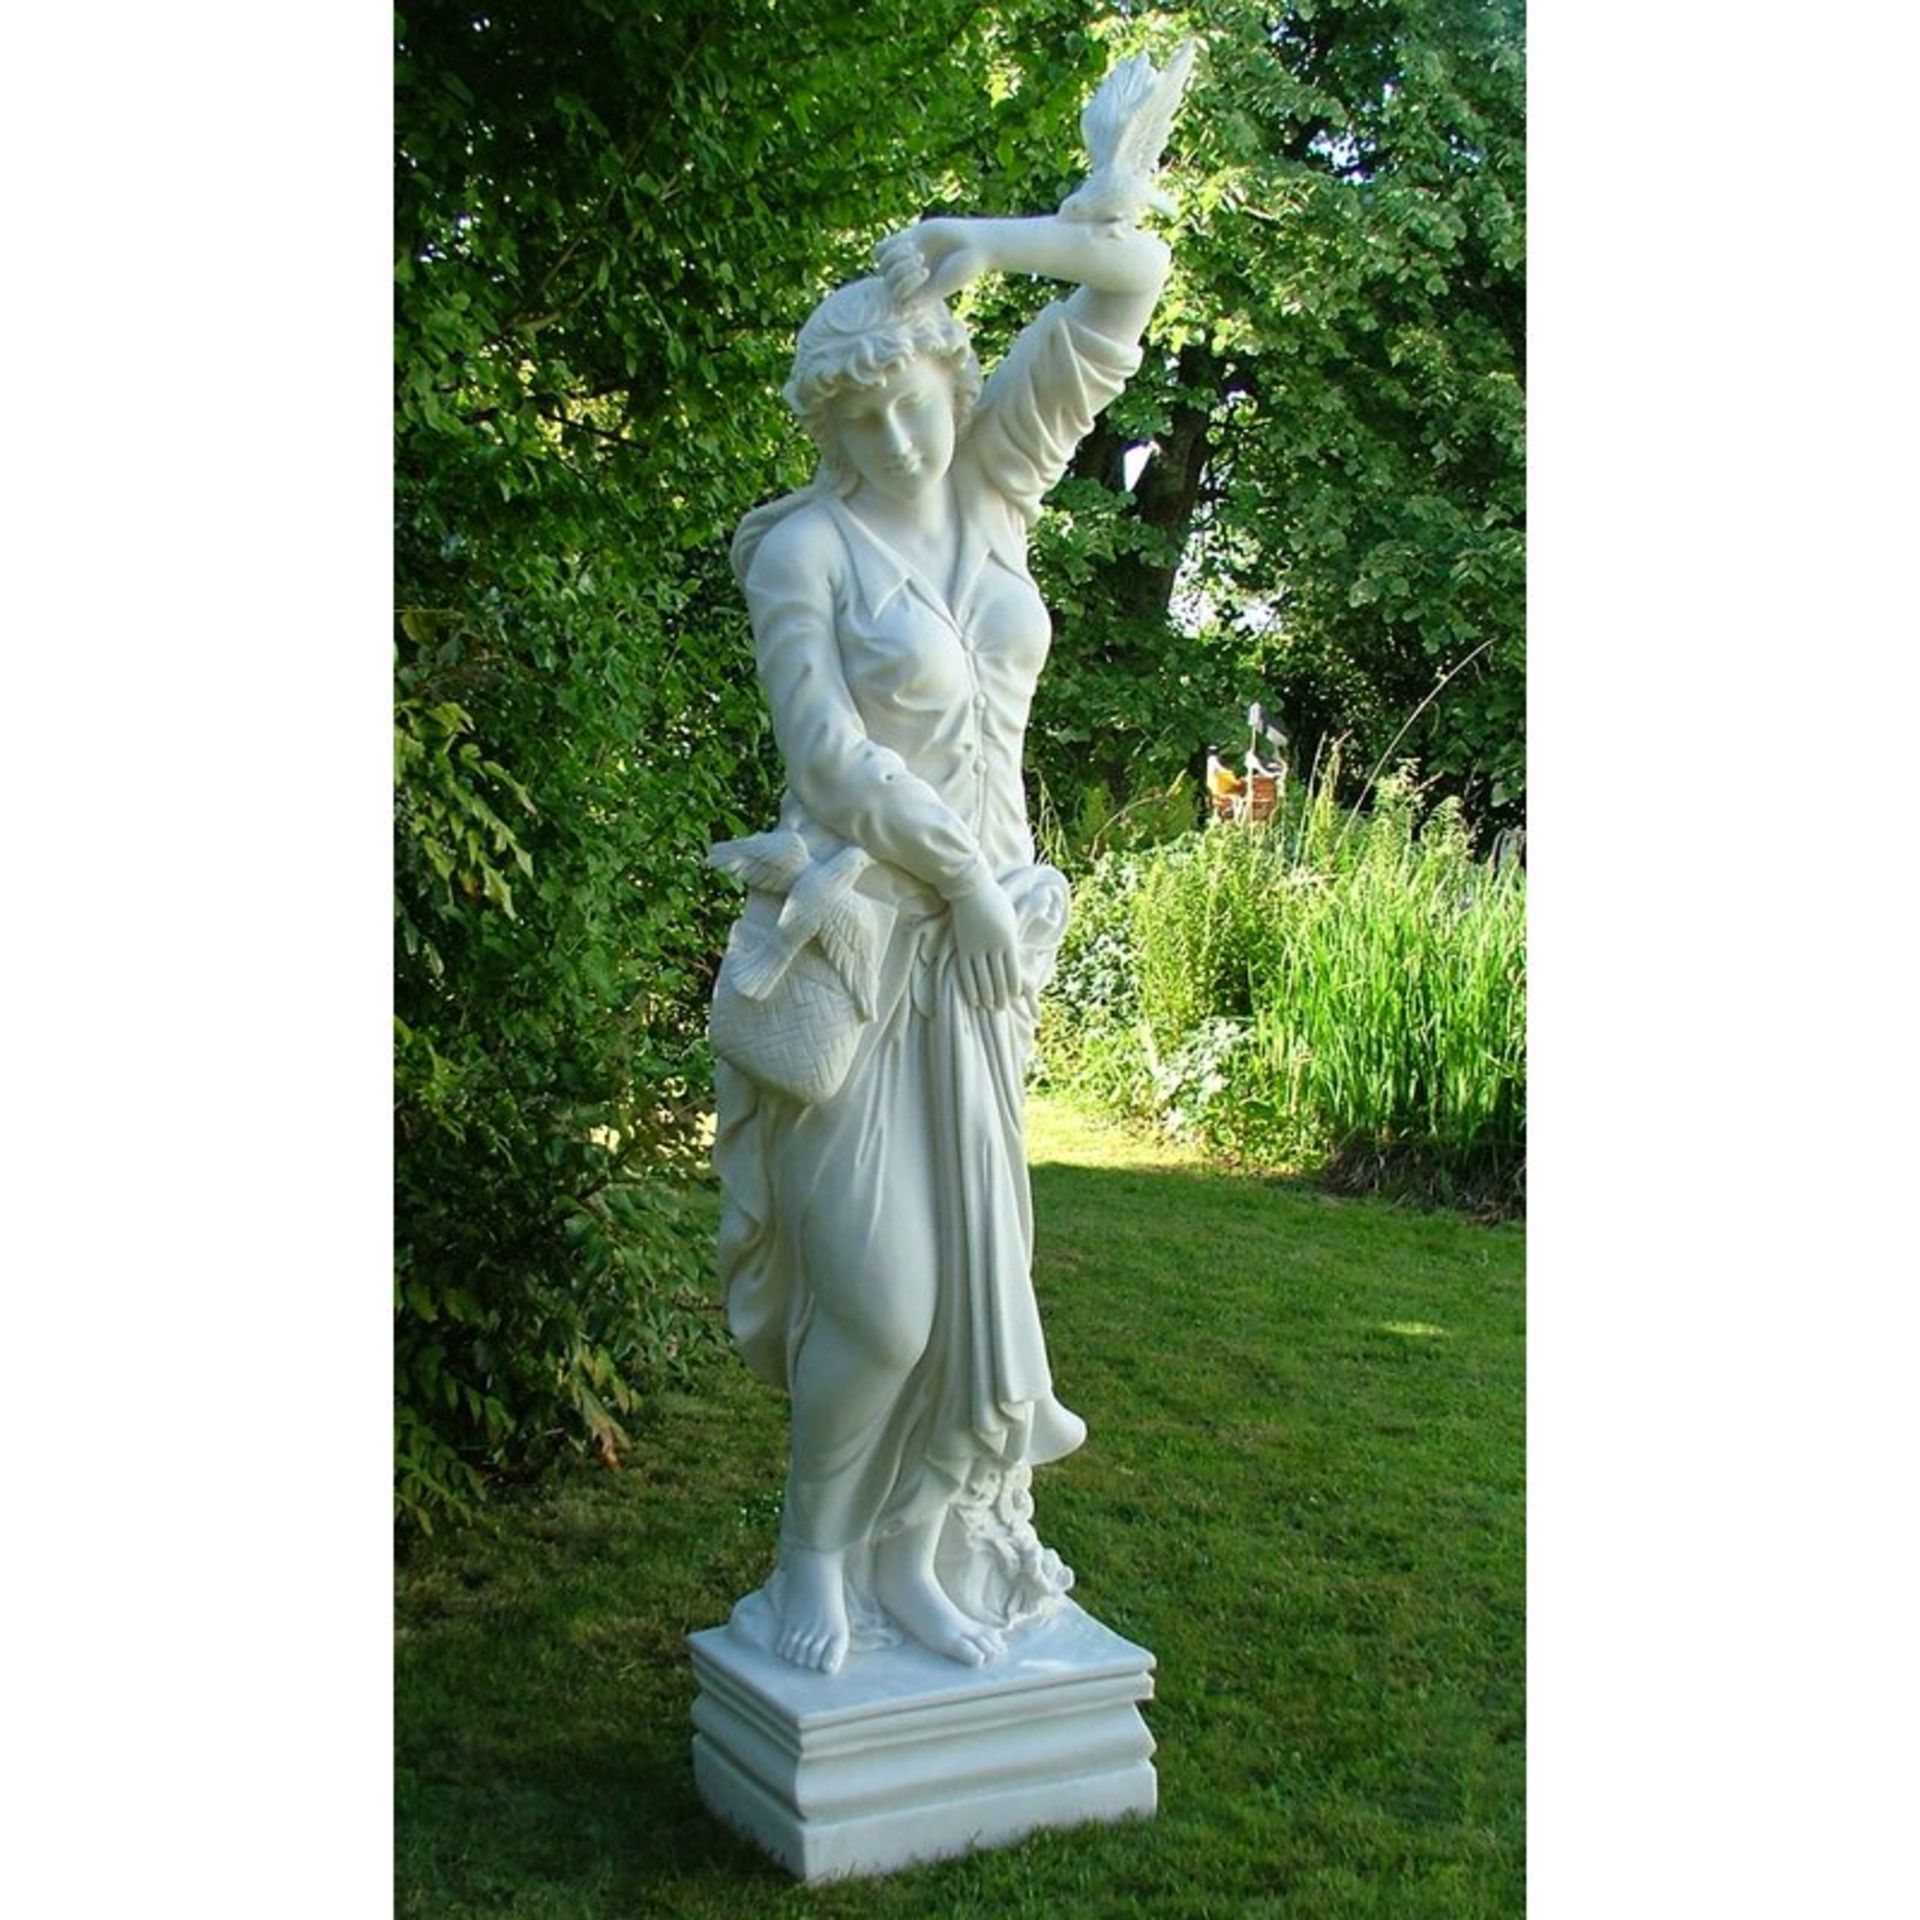 Ellensburg Melanie Statue - RRP £117.99. (TOP OF BIRD WING IS BROKE OFF) COLLECTION ONLY